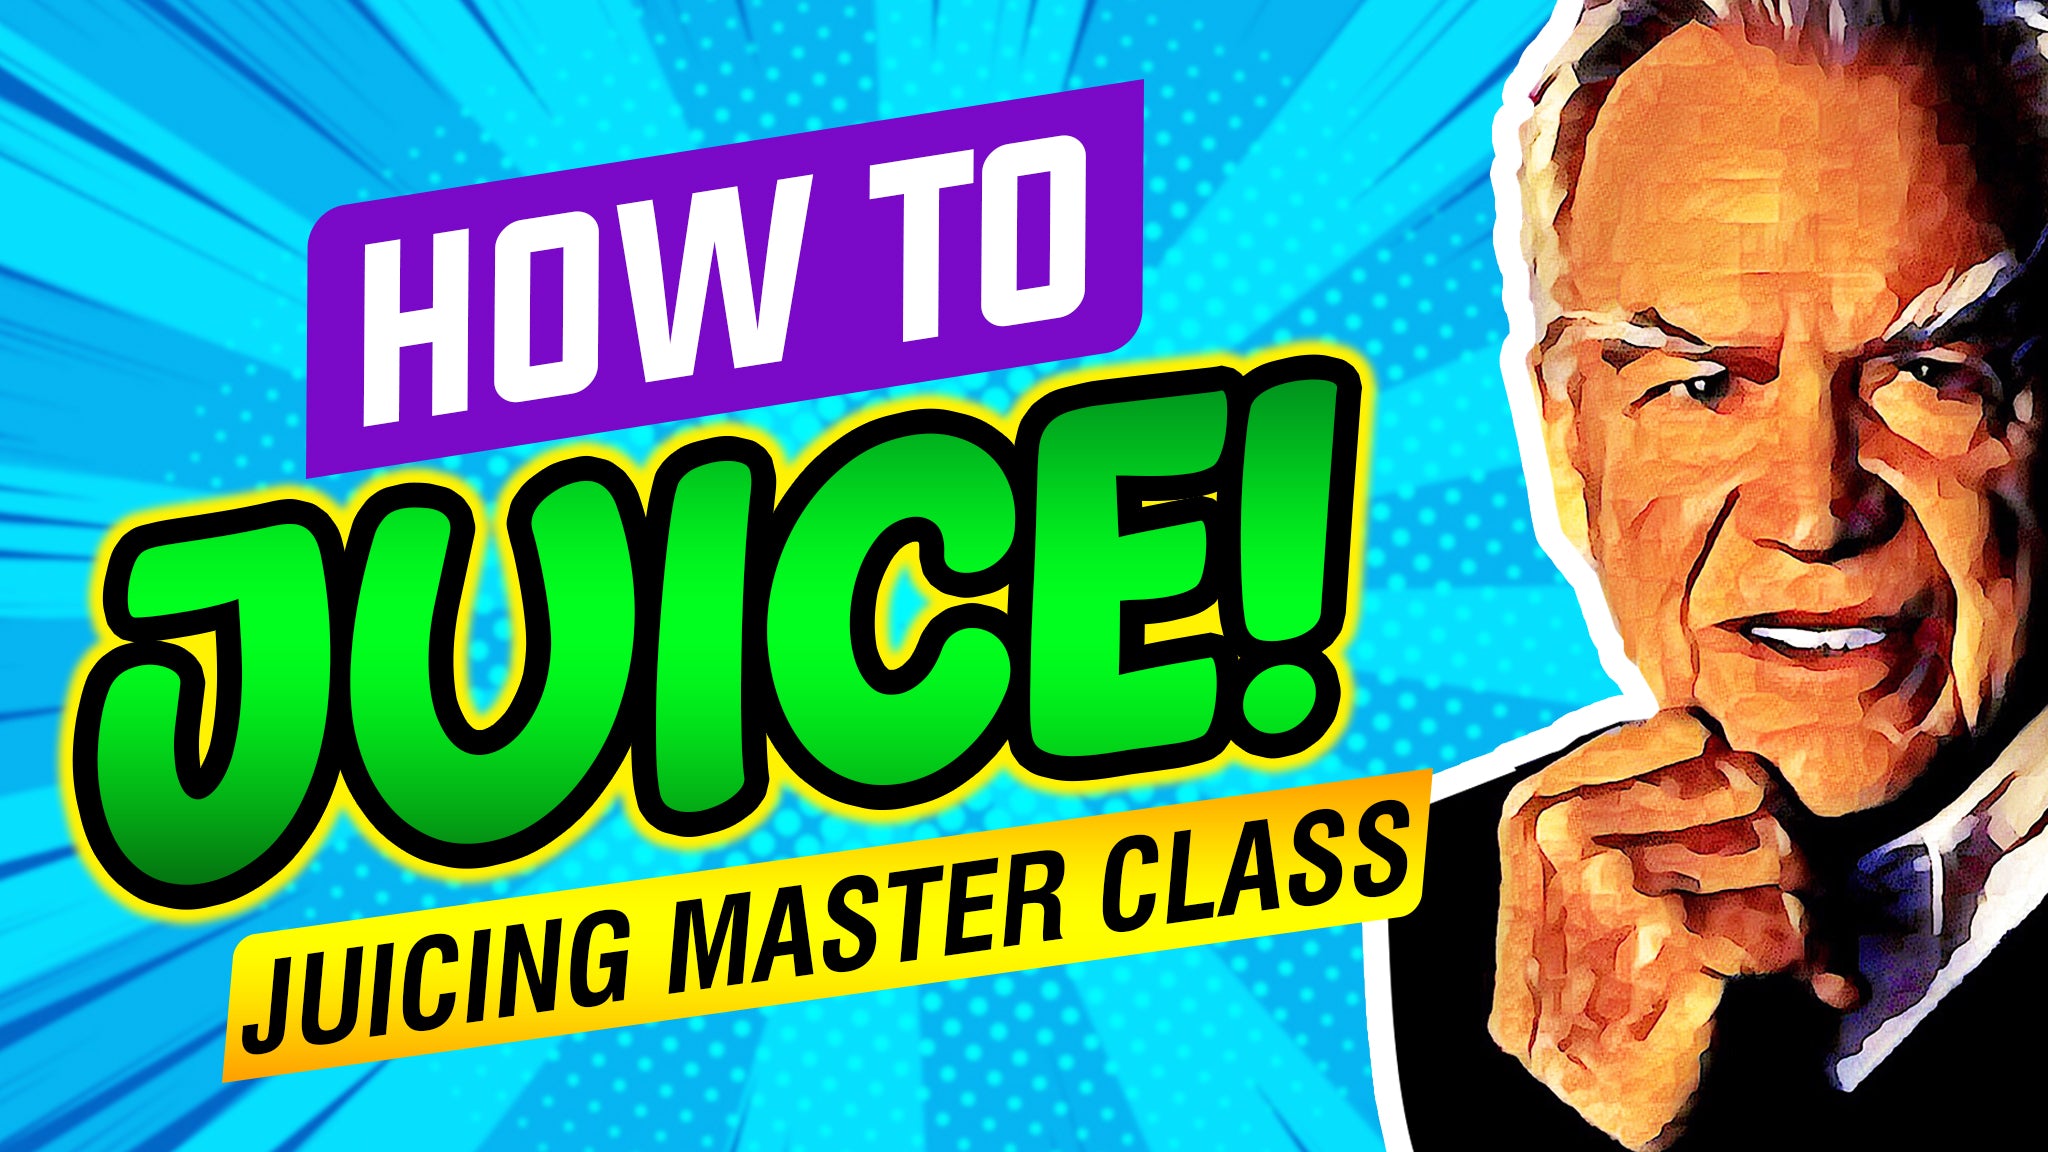 The Juicing Master Class HOLIDAY SPECIAL!  Regular $399.00 NOW $199.00 until 12/23/2023